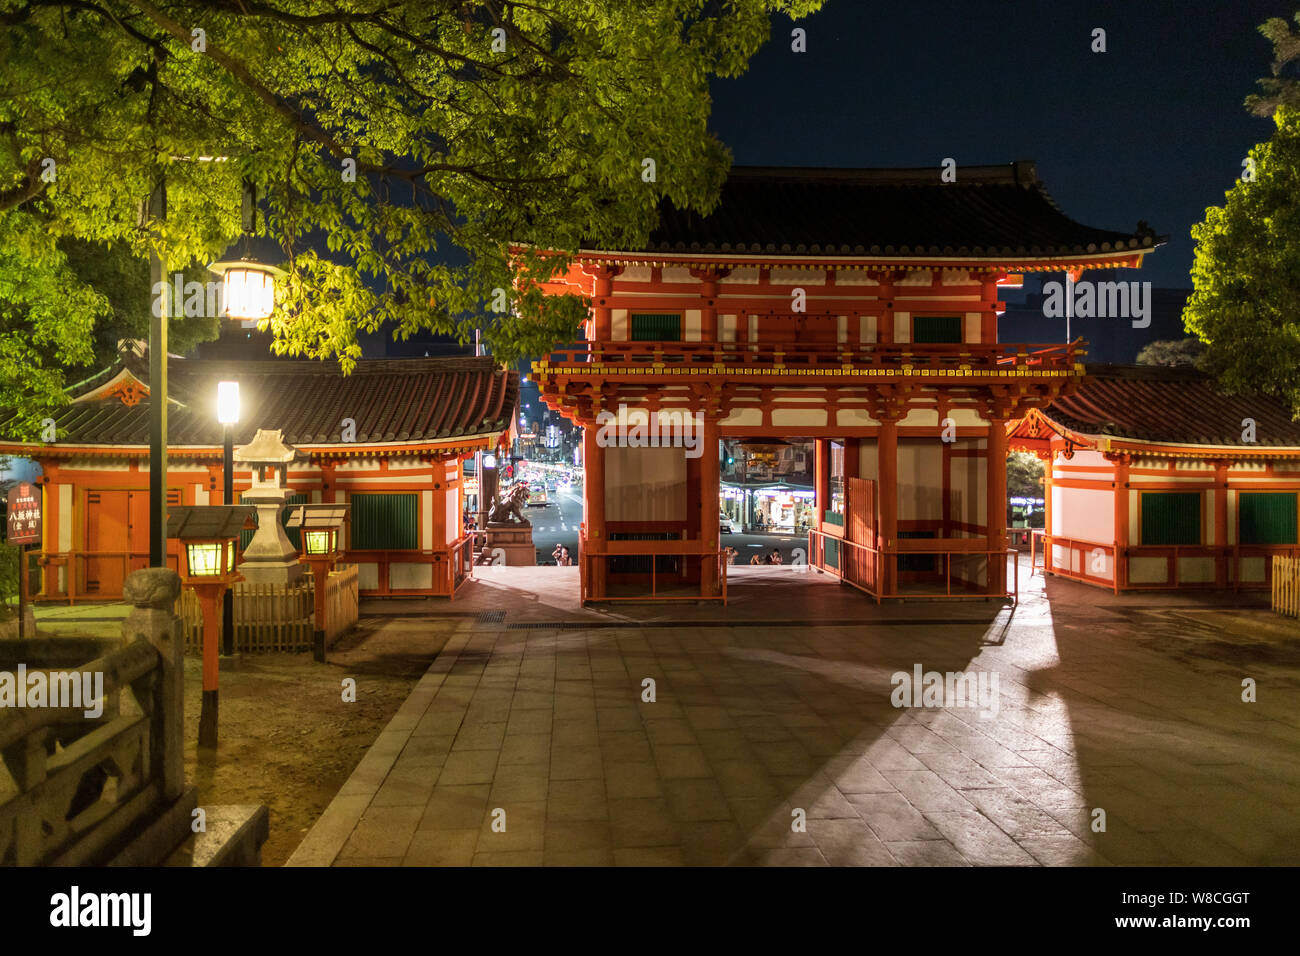 Gion, Japan - April 2, 2019: Quite night at entrance to Yasaka Shrine, one of the popular tourist destinations in the area Stock Photo